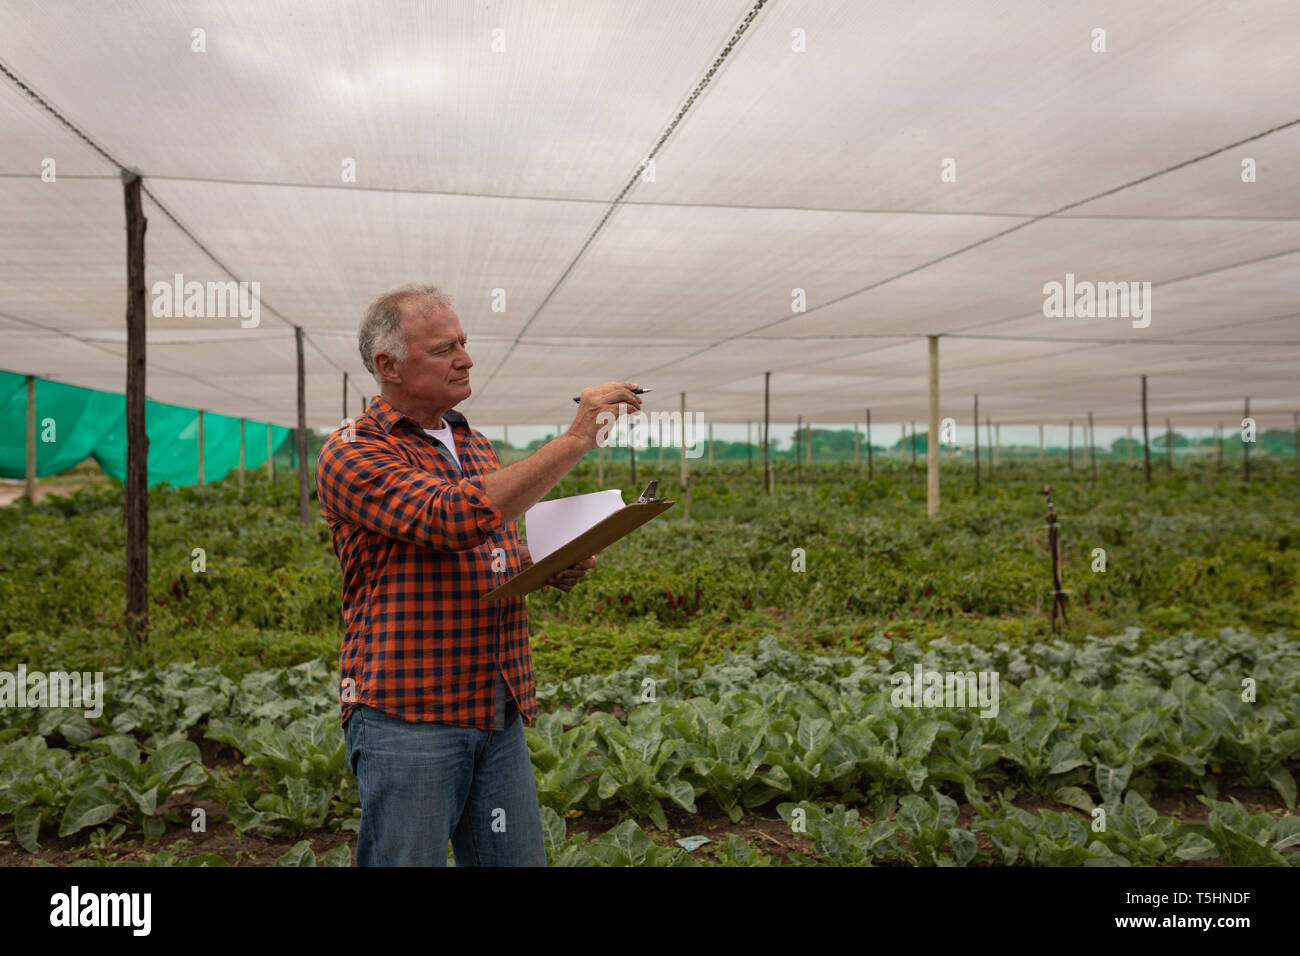 Farmer maintaining the record of plants on clipboard Stock Photo